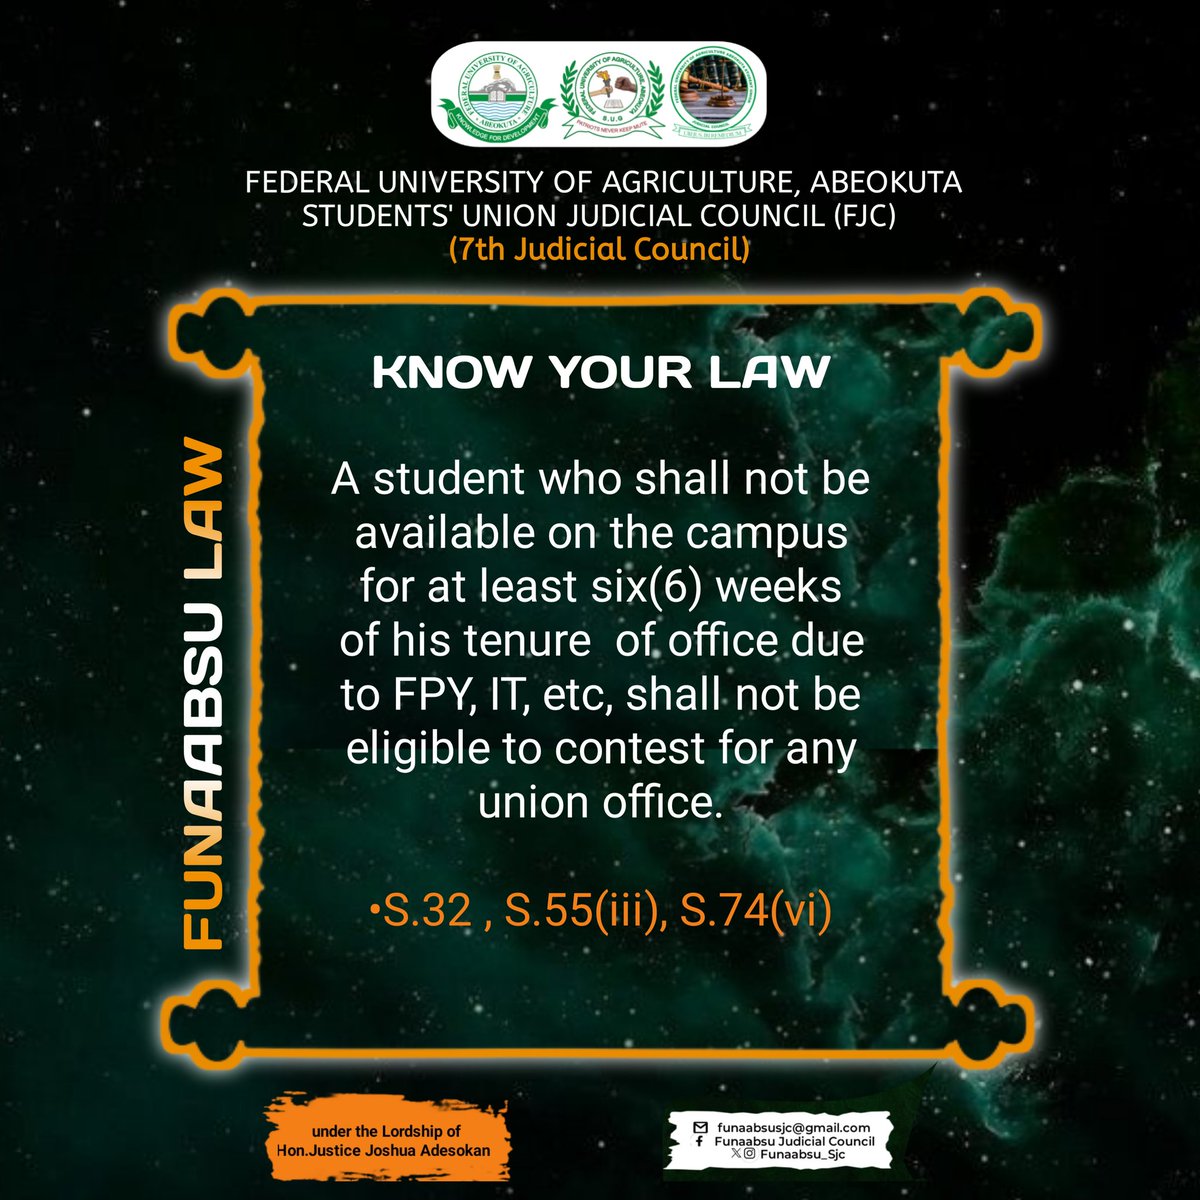 Being a Union officer is about serving humanity but respecting the constitution is sacrosanct.

#KnowYourLaw
#FUNAABSUConstitution
#FUNAABSU23/24
#TeamUbuntu